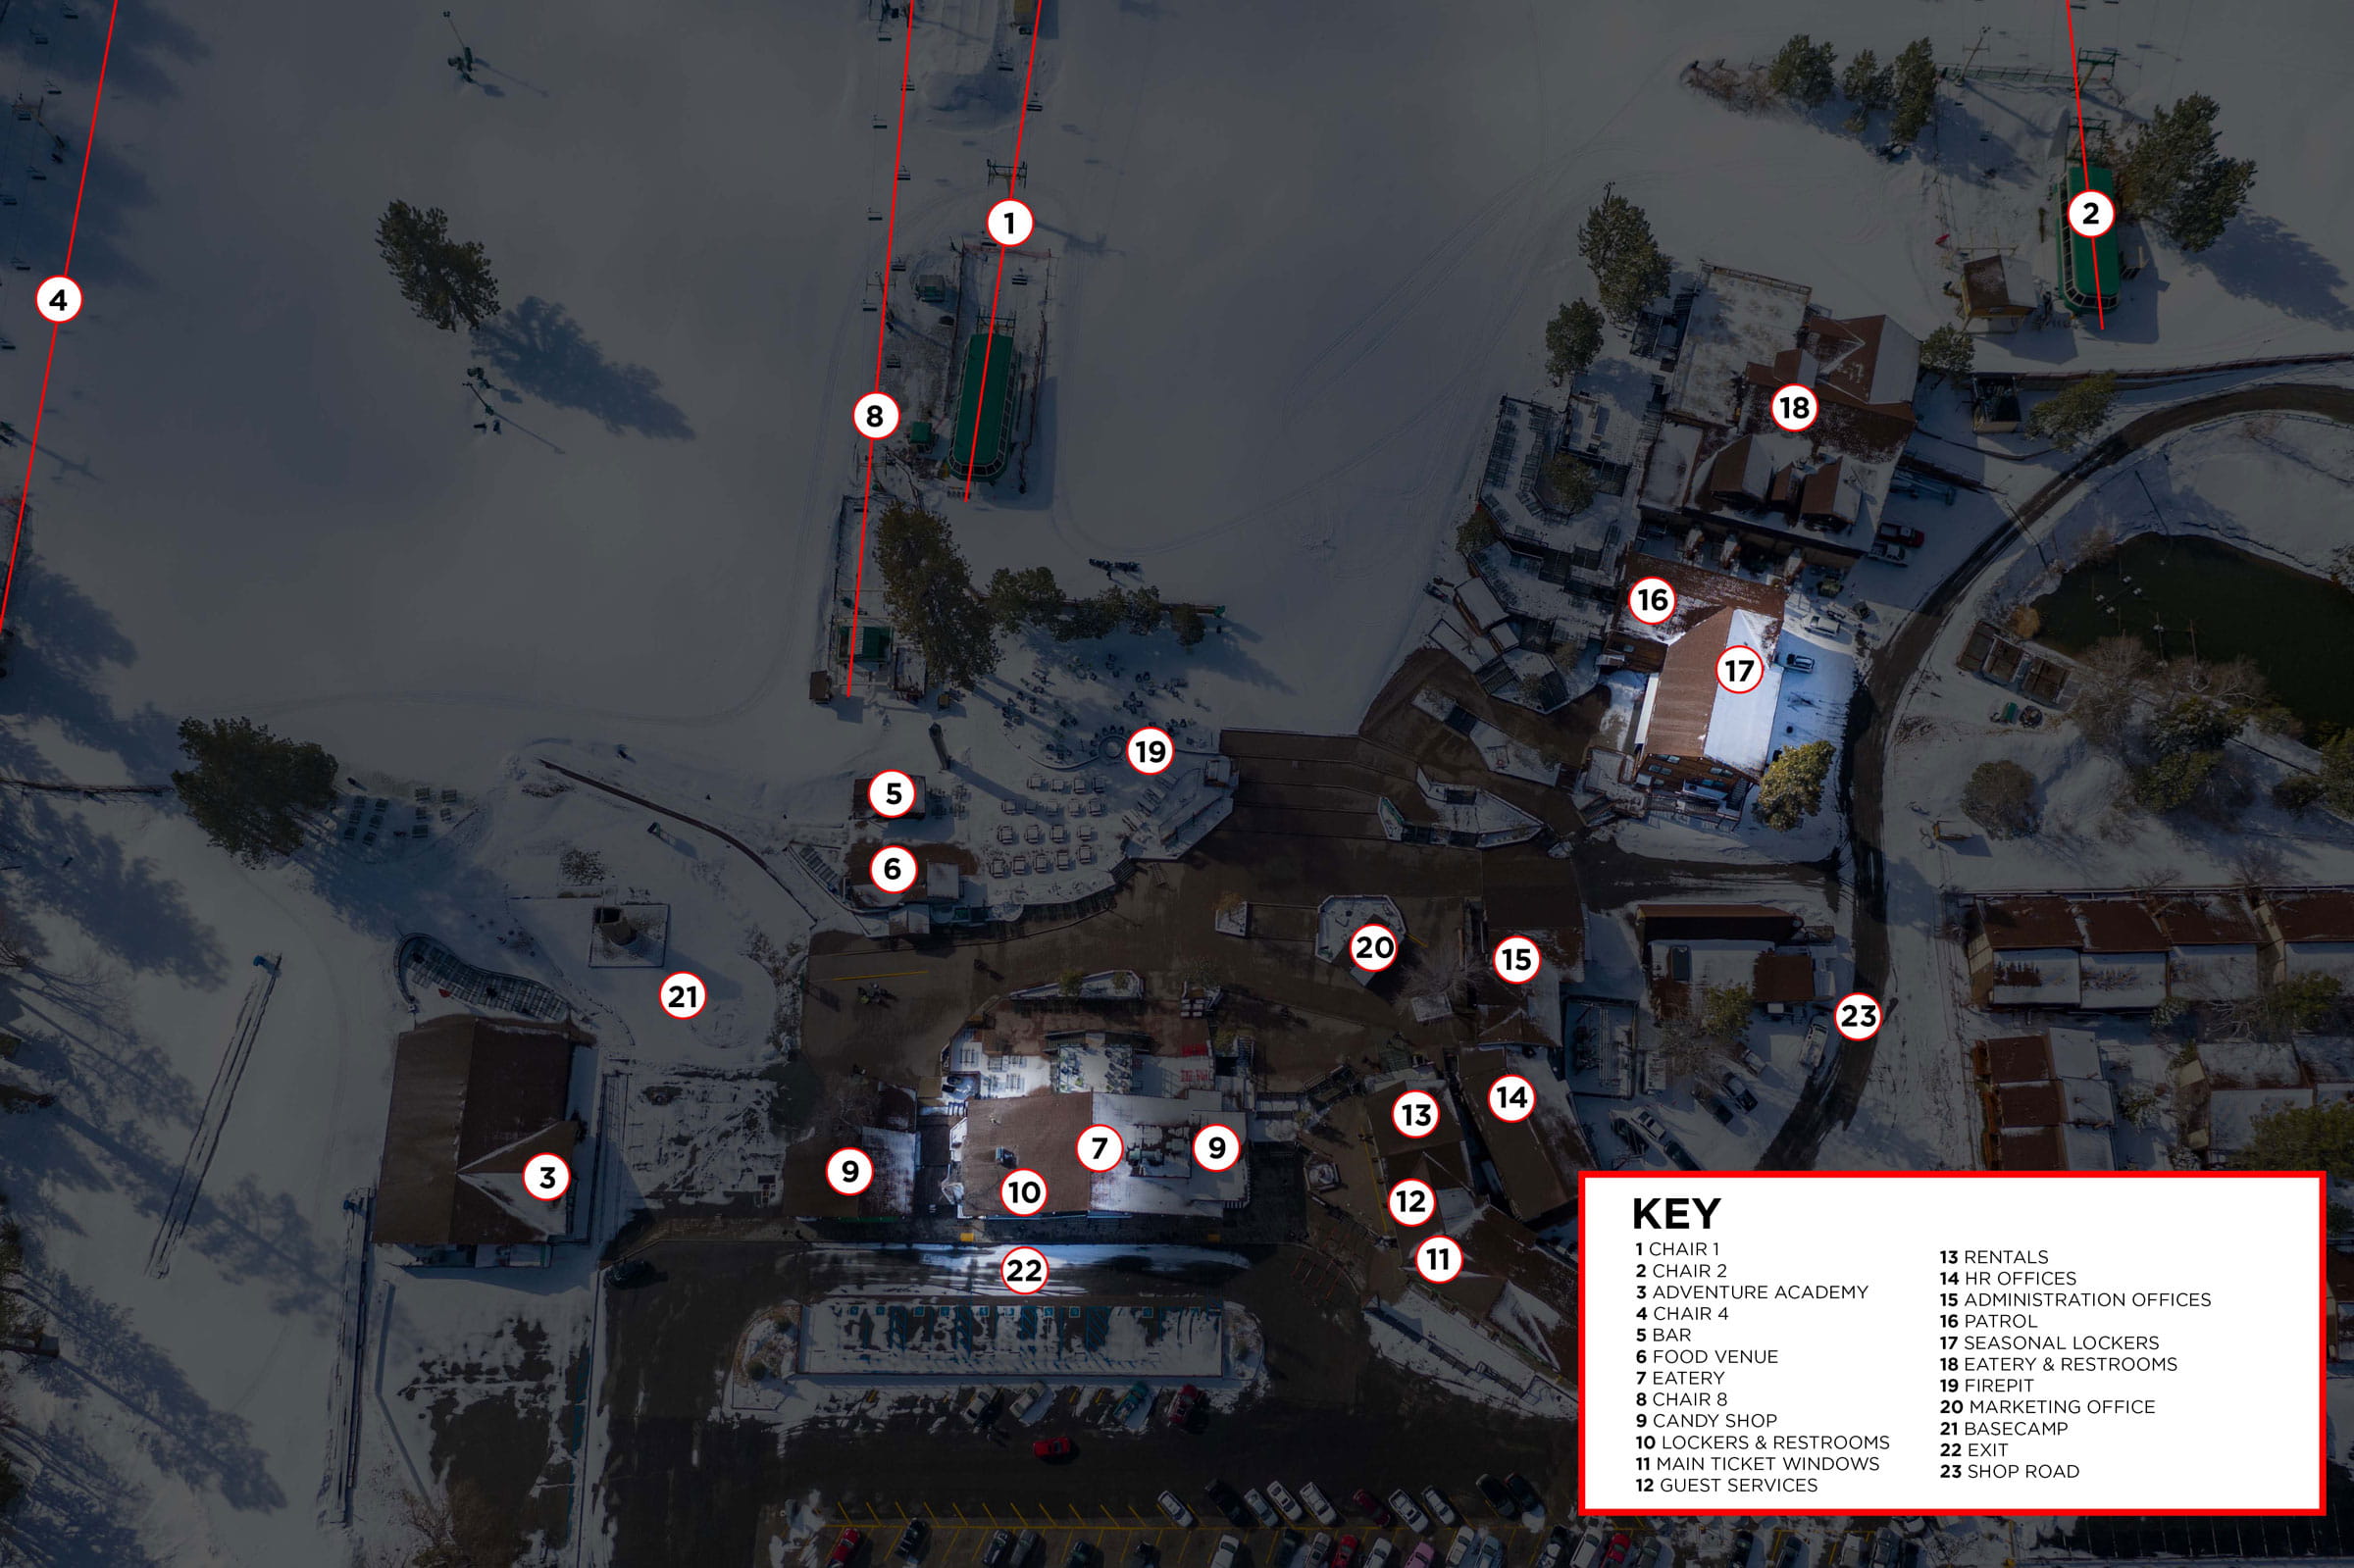 Snow Summit base area drone view in winter with legend